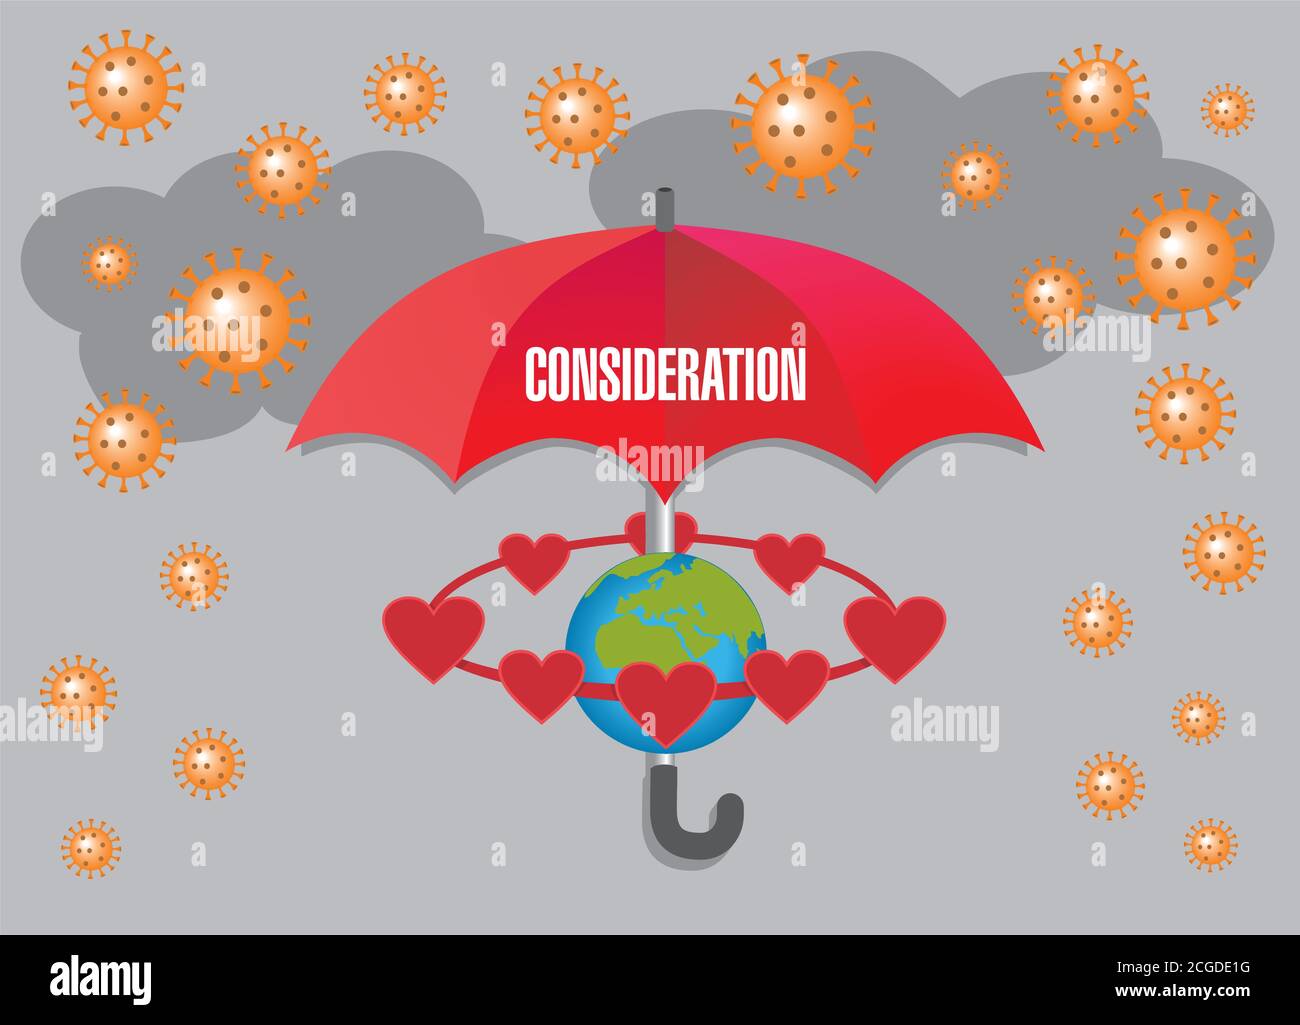 Red umbrella protects earth surronded by hearts. Vector illustration. Stock Vector